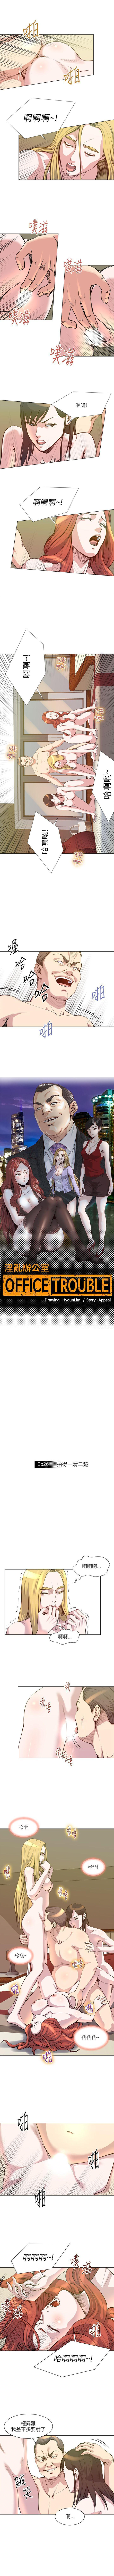 OFFICE TROUBLE 1-28 101